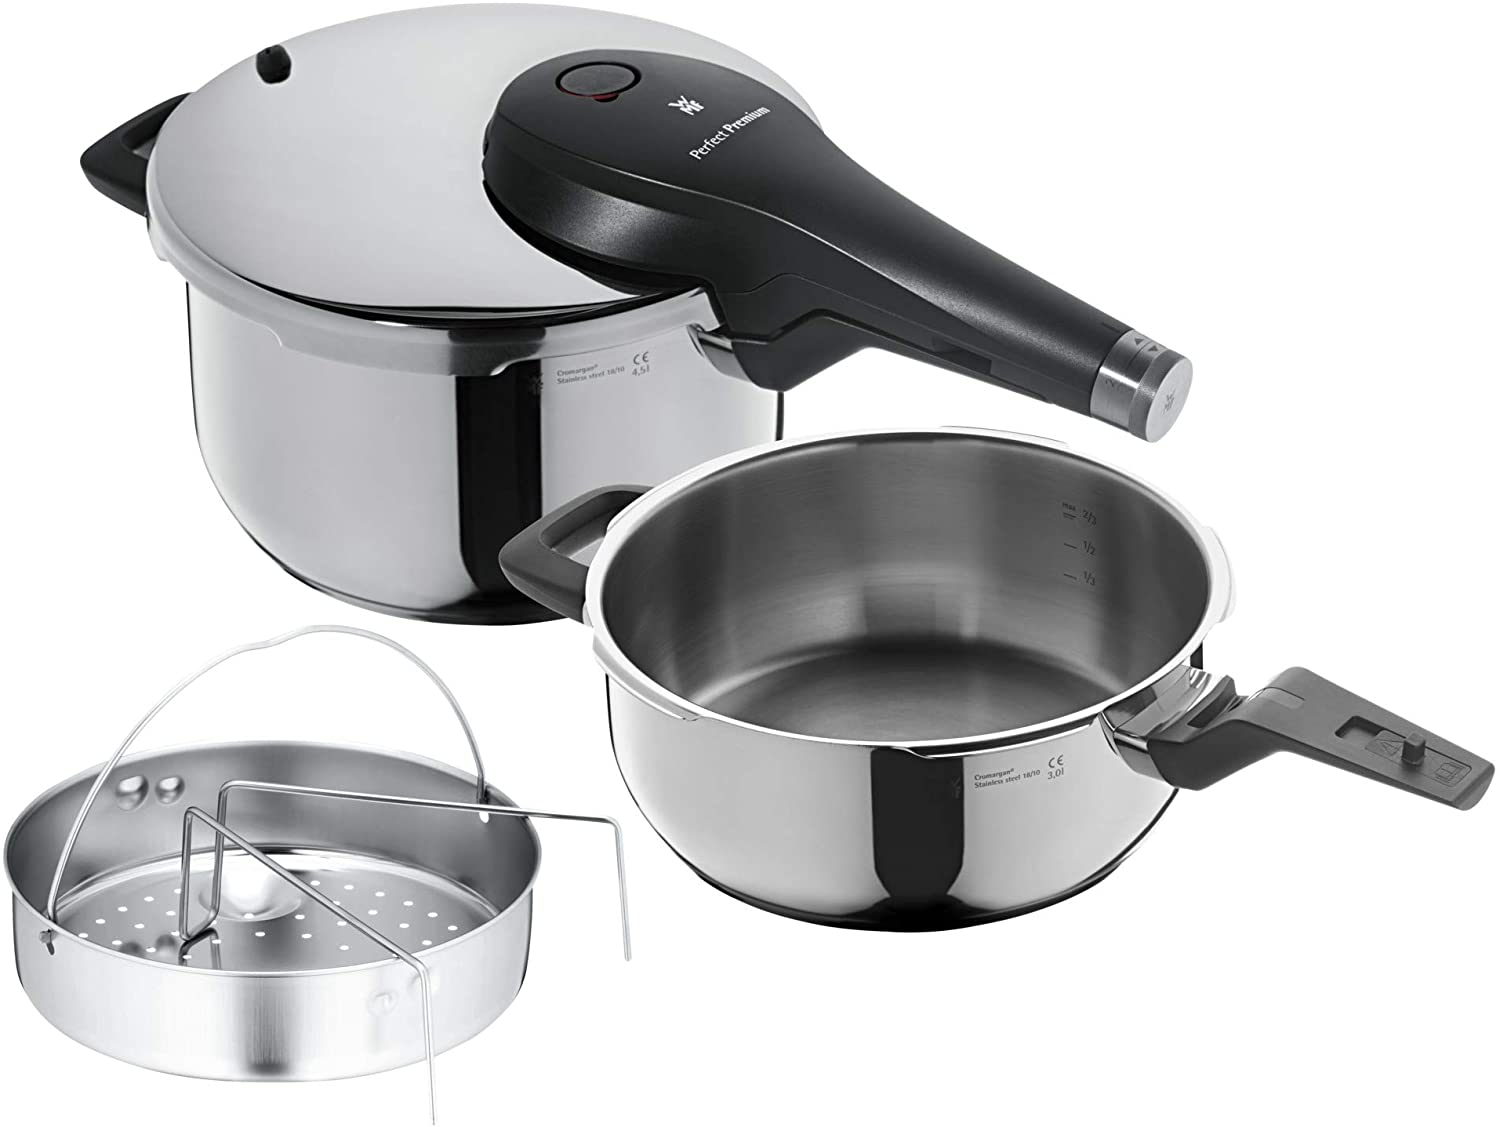 WMF Cromargan Stainless Steel Perfect Premium 2-Piece Pressure Cooker 4.5 L & 3,0l with Insert Polished 2 Cooking Levels Single-handed Pressure Regulator, Dishwasher Safe, Diameter 22 cm Suitable for Induction, Stainless Steel, Silver, 2 Units